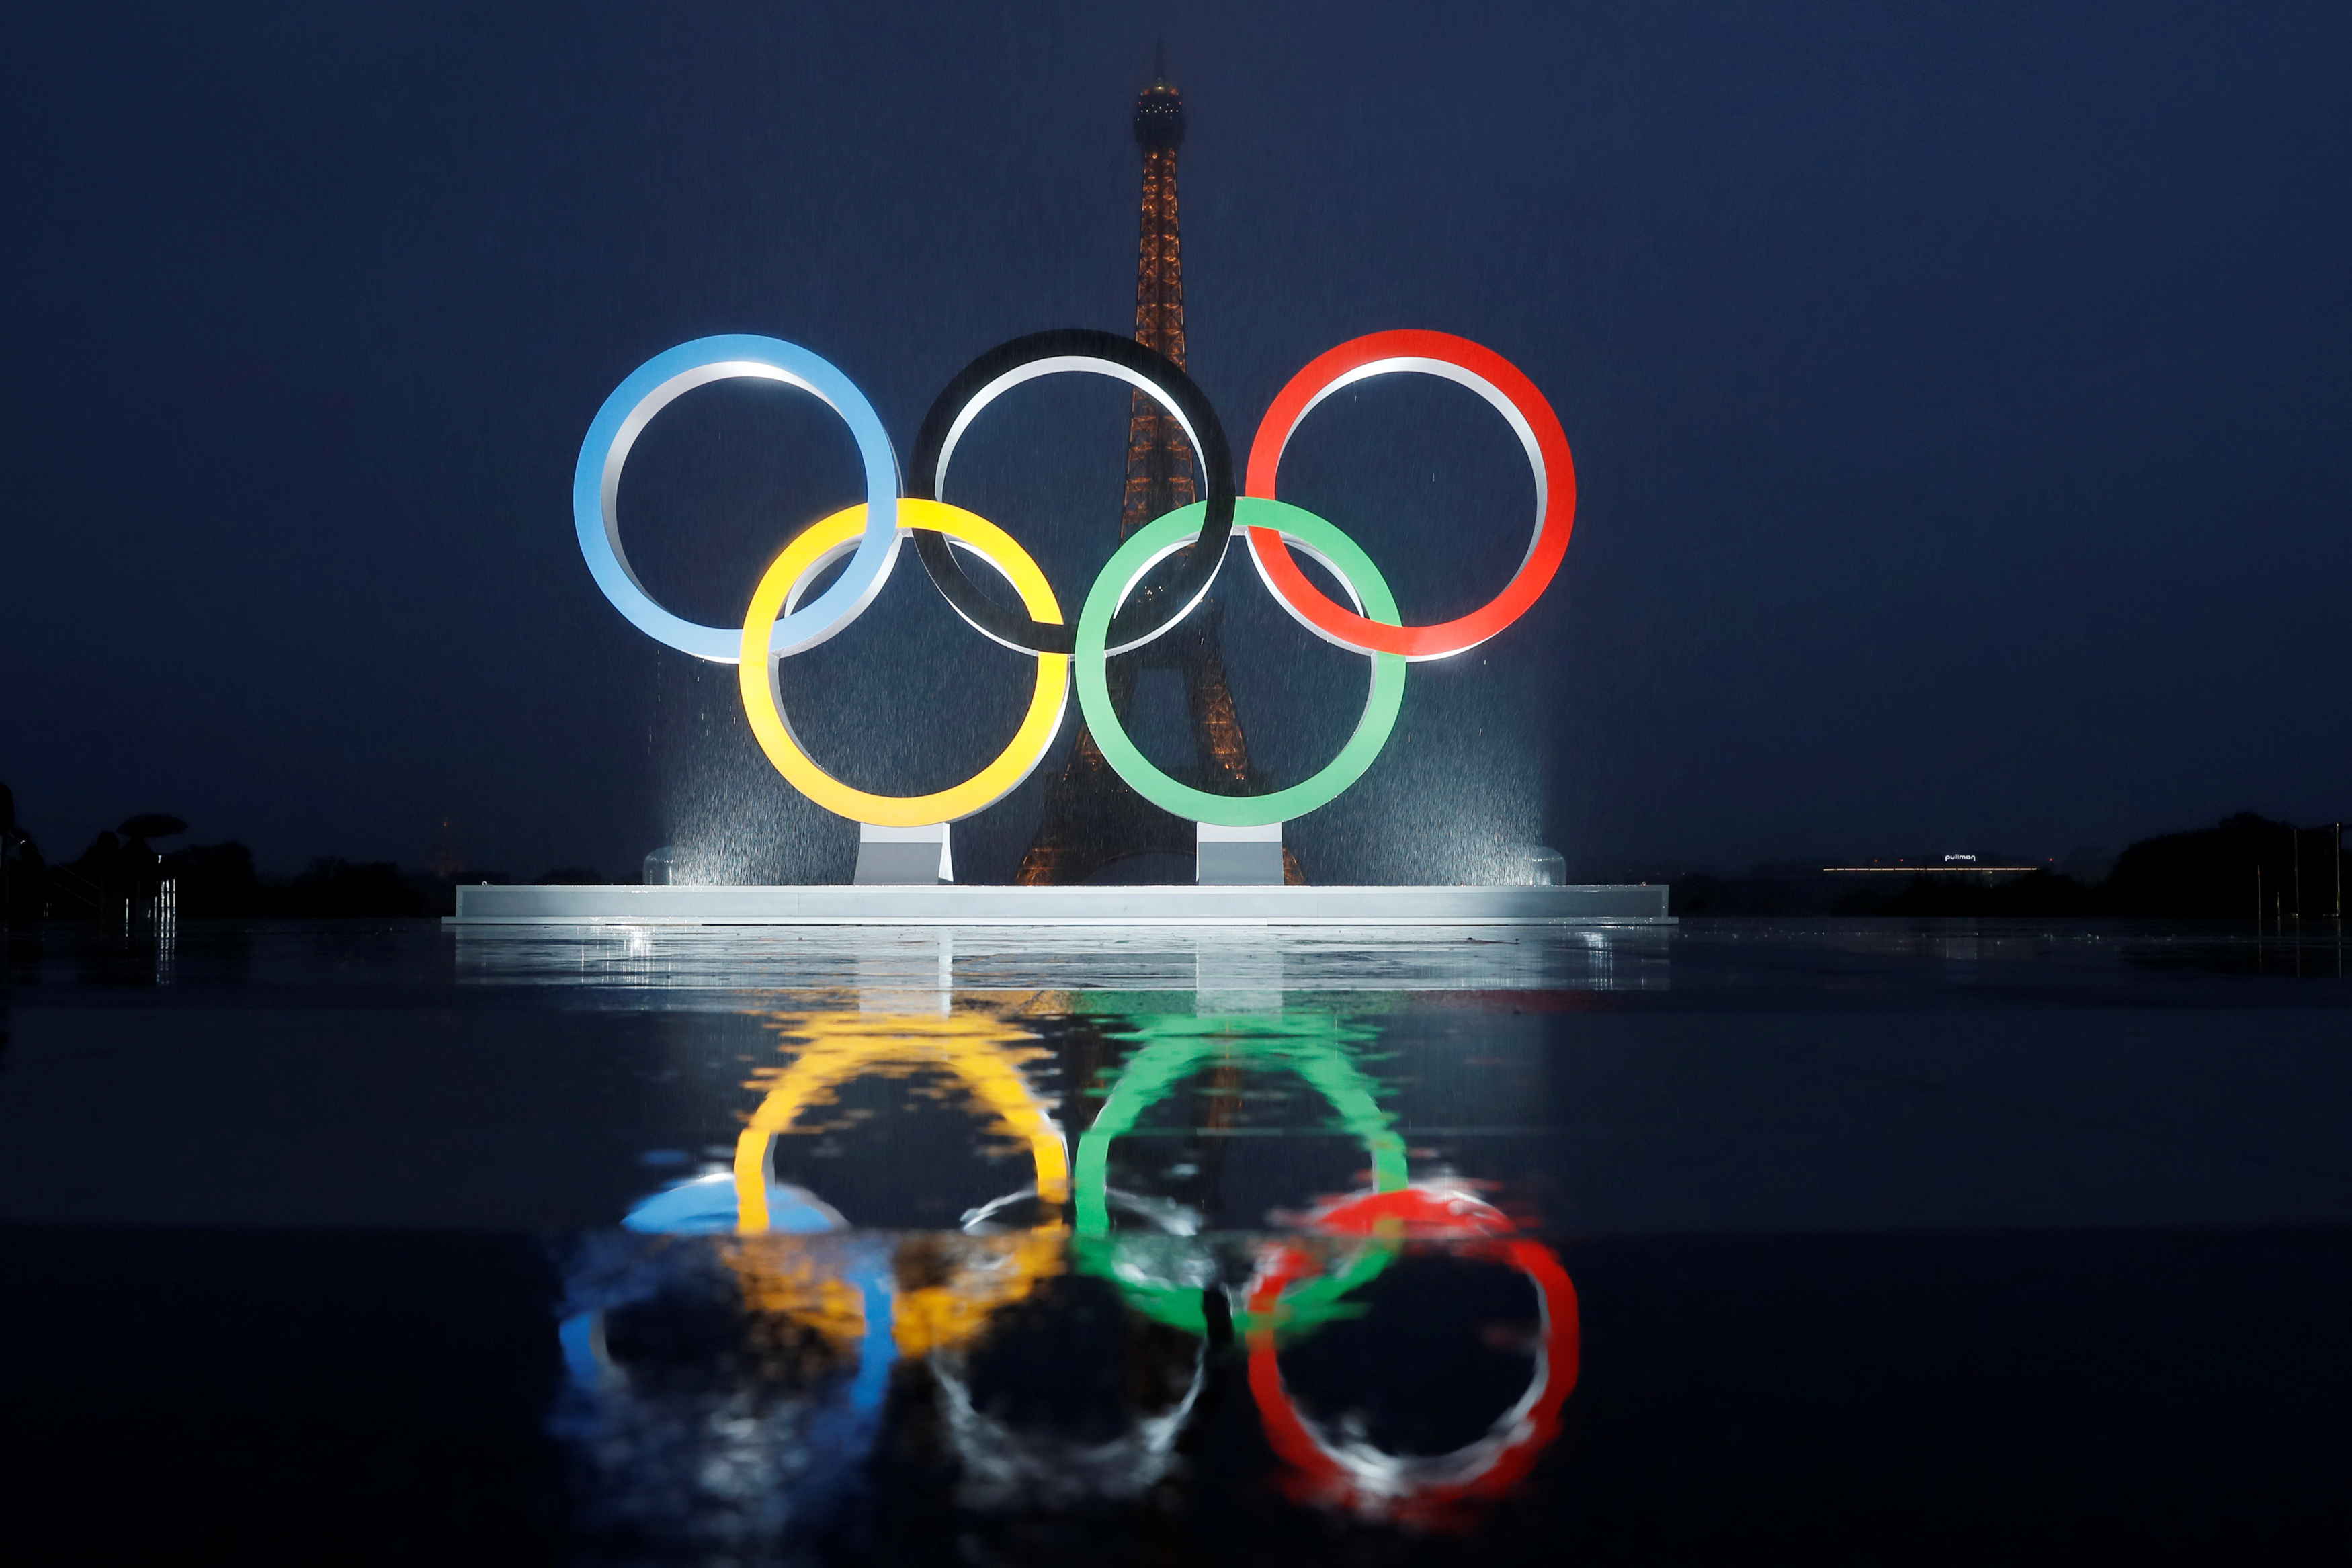 The Olympic rings are seen after the IOC officially announced that Paris won the 2024 Olympic bid during a ceremony at the Trocadero square near the Eiffel Tower in Paris